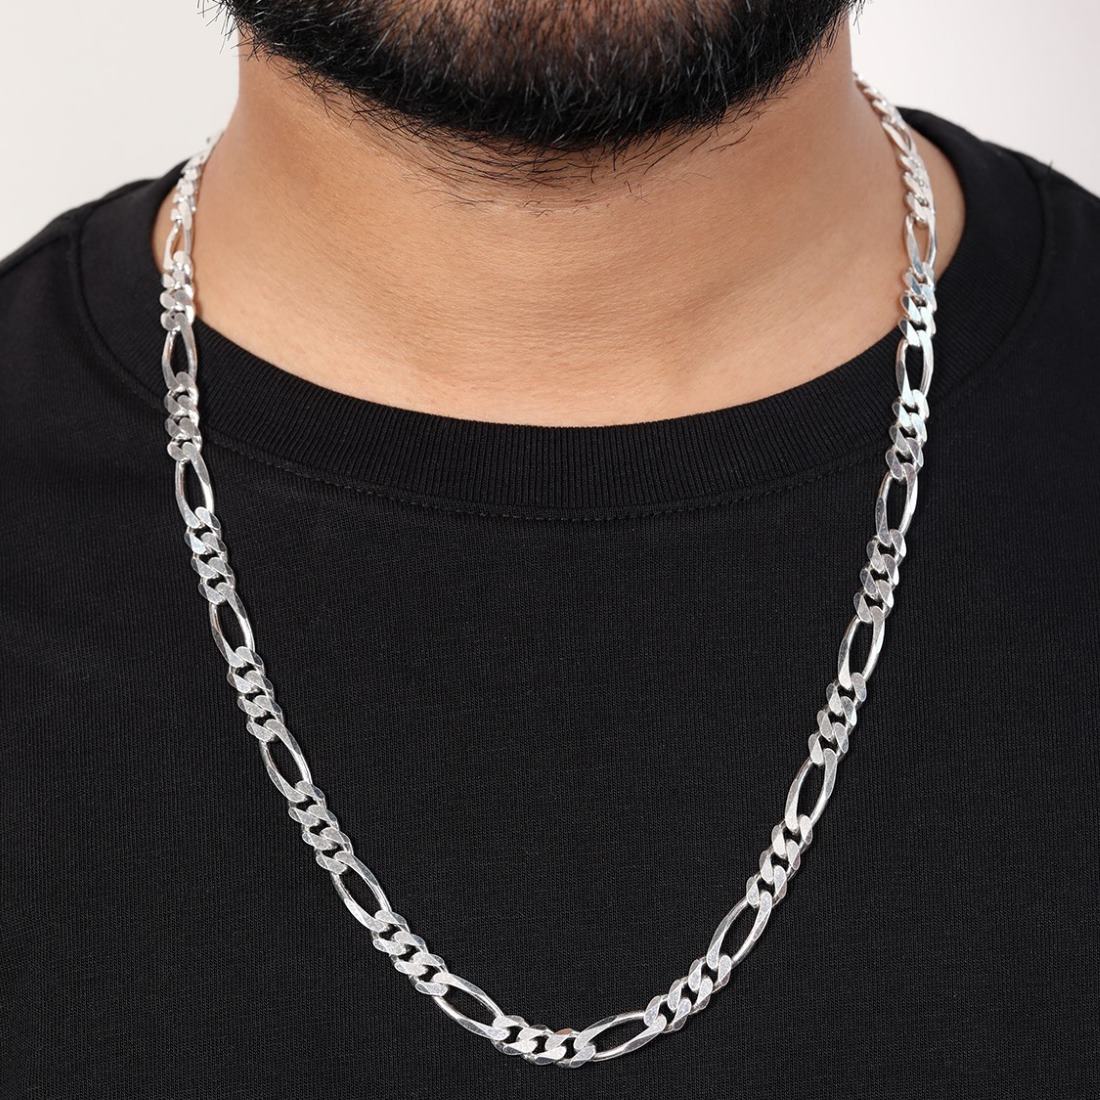 Refined Links Rhodium Plated 925 Sterling Silver Men's Chain